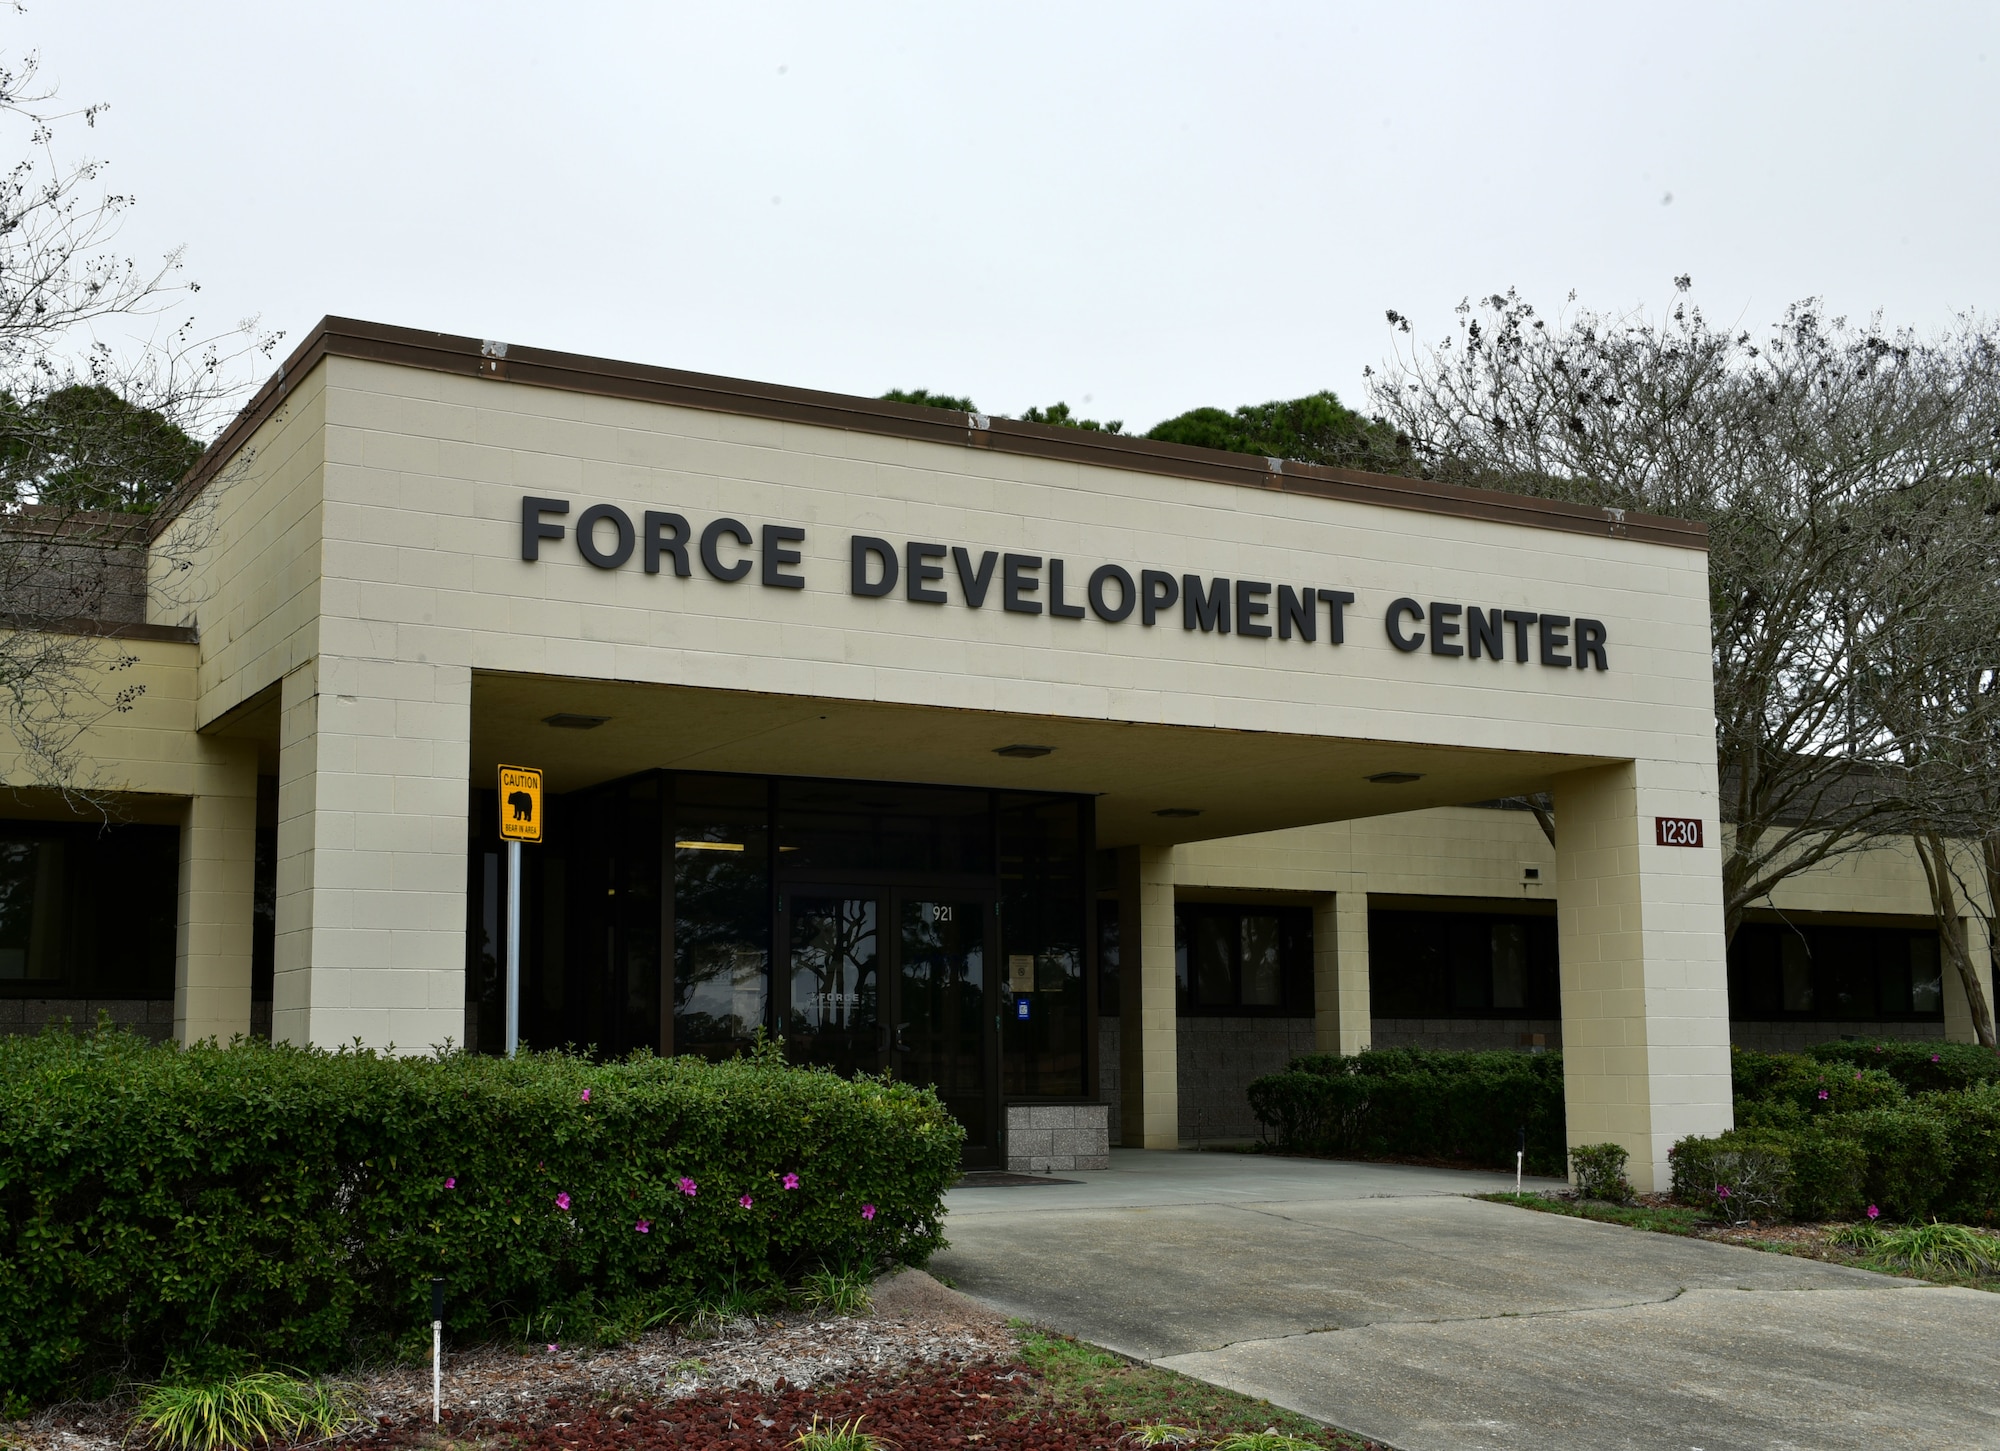 The Force Development Center awaits Airmen and is open for business and ready to help Airmen achieve their educational goals at Tyndall Air Force Base, Fla., Feb. 14, 2018. The center is home to the education office, which is the hub for an array of services and programs ranging from counseling services on both Community College of the Air Force and civilian degrees, to commissioning programs and Enlisted Professional Military Education testing. (U.S. Air Force photo by Airman 1st Class Isaiah J. Soliz/Released)